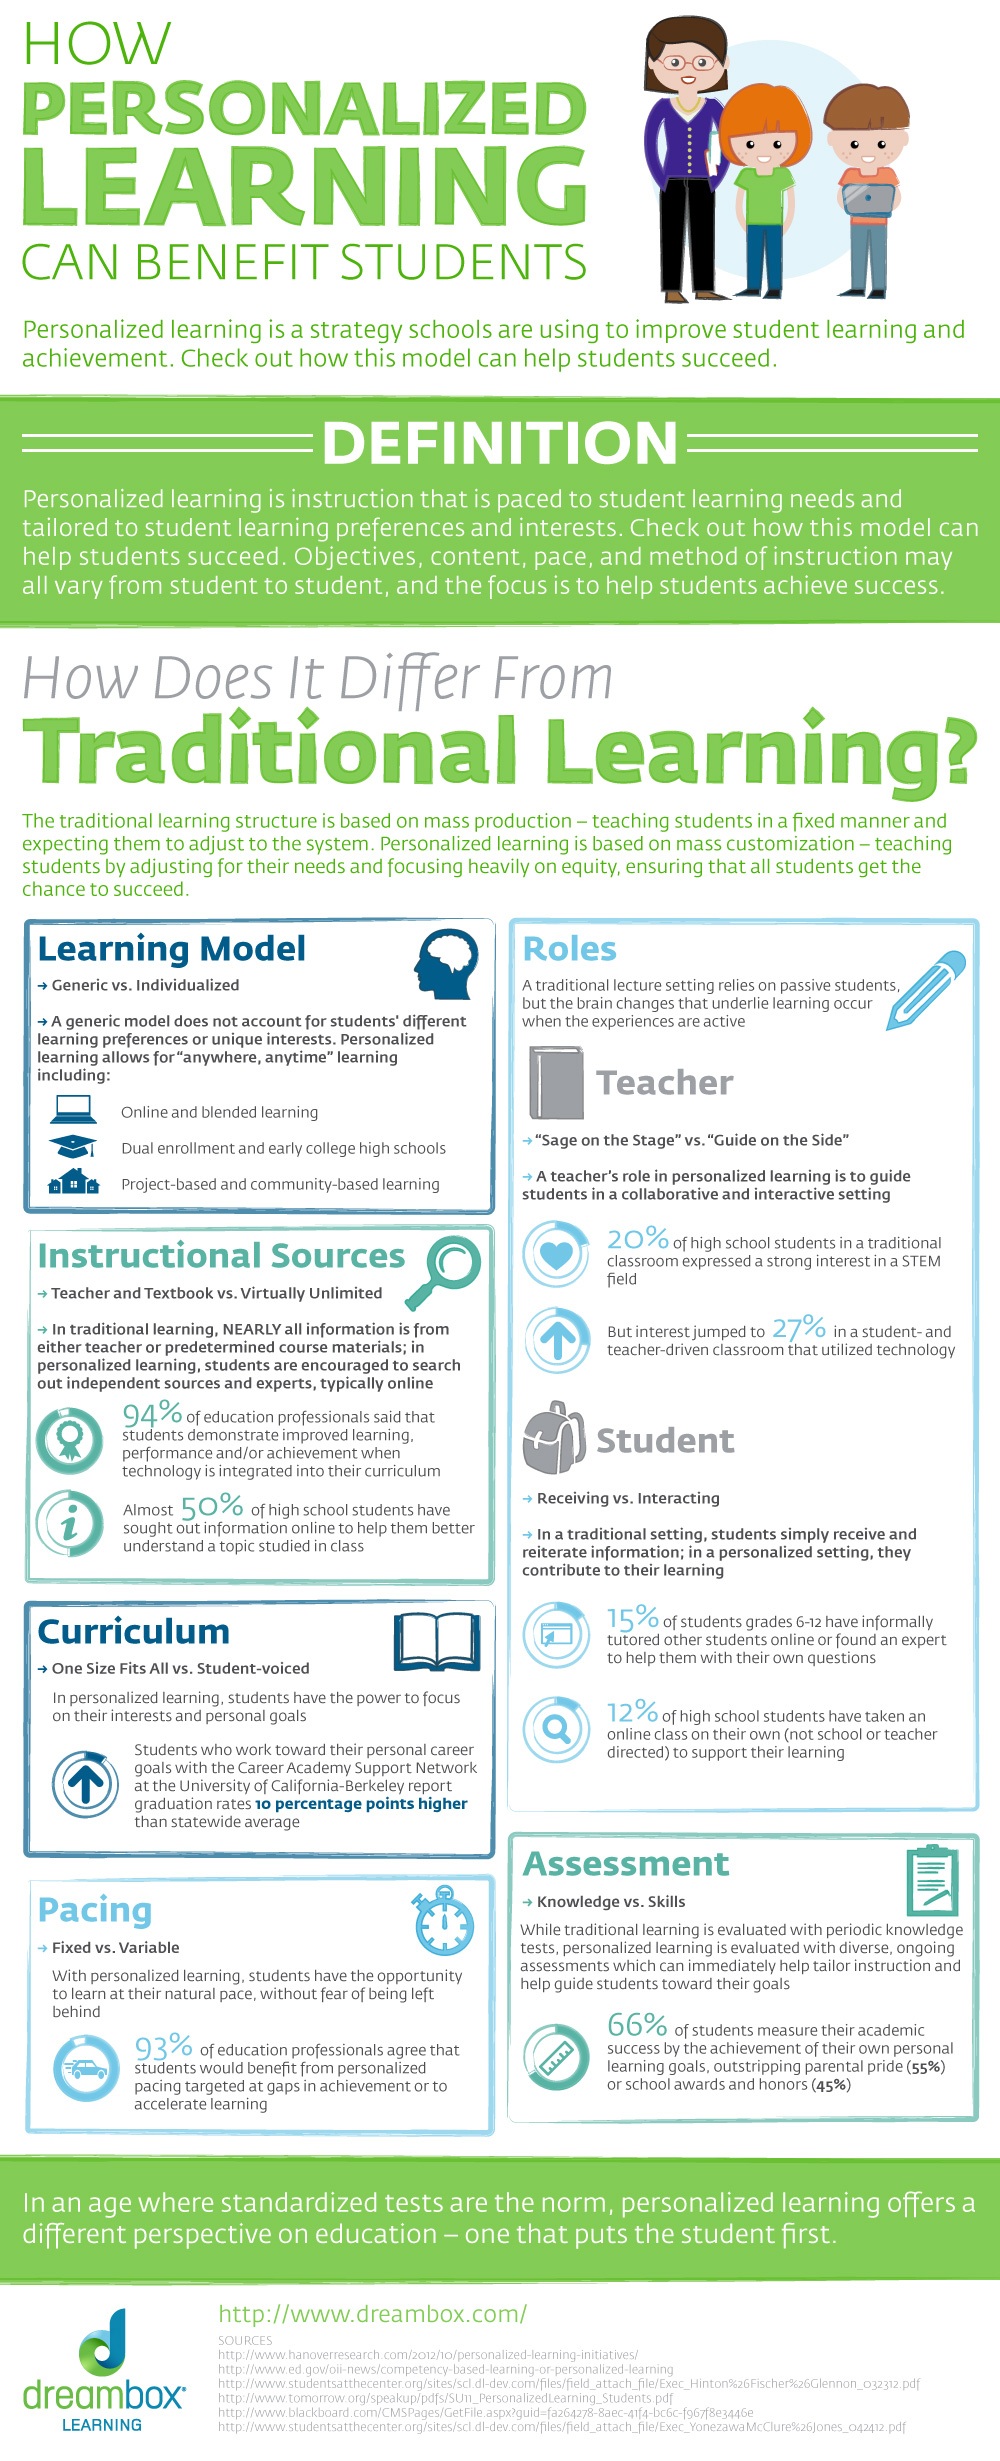 How-Personalized-Learning-Can-Benefit-Students-Infographic